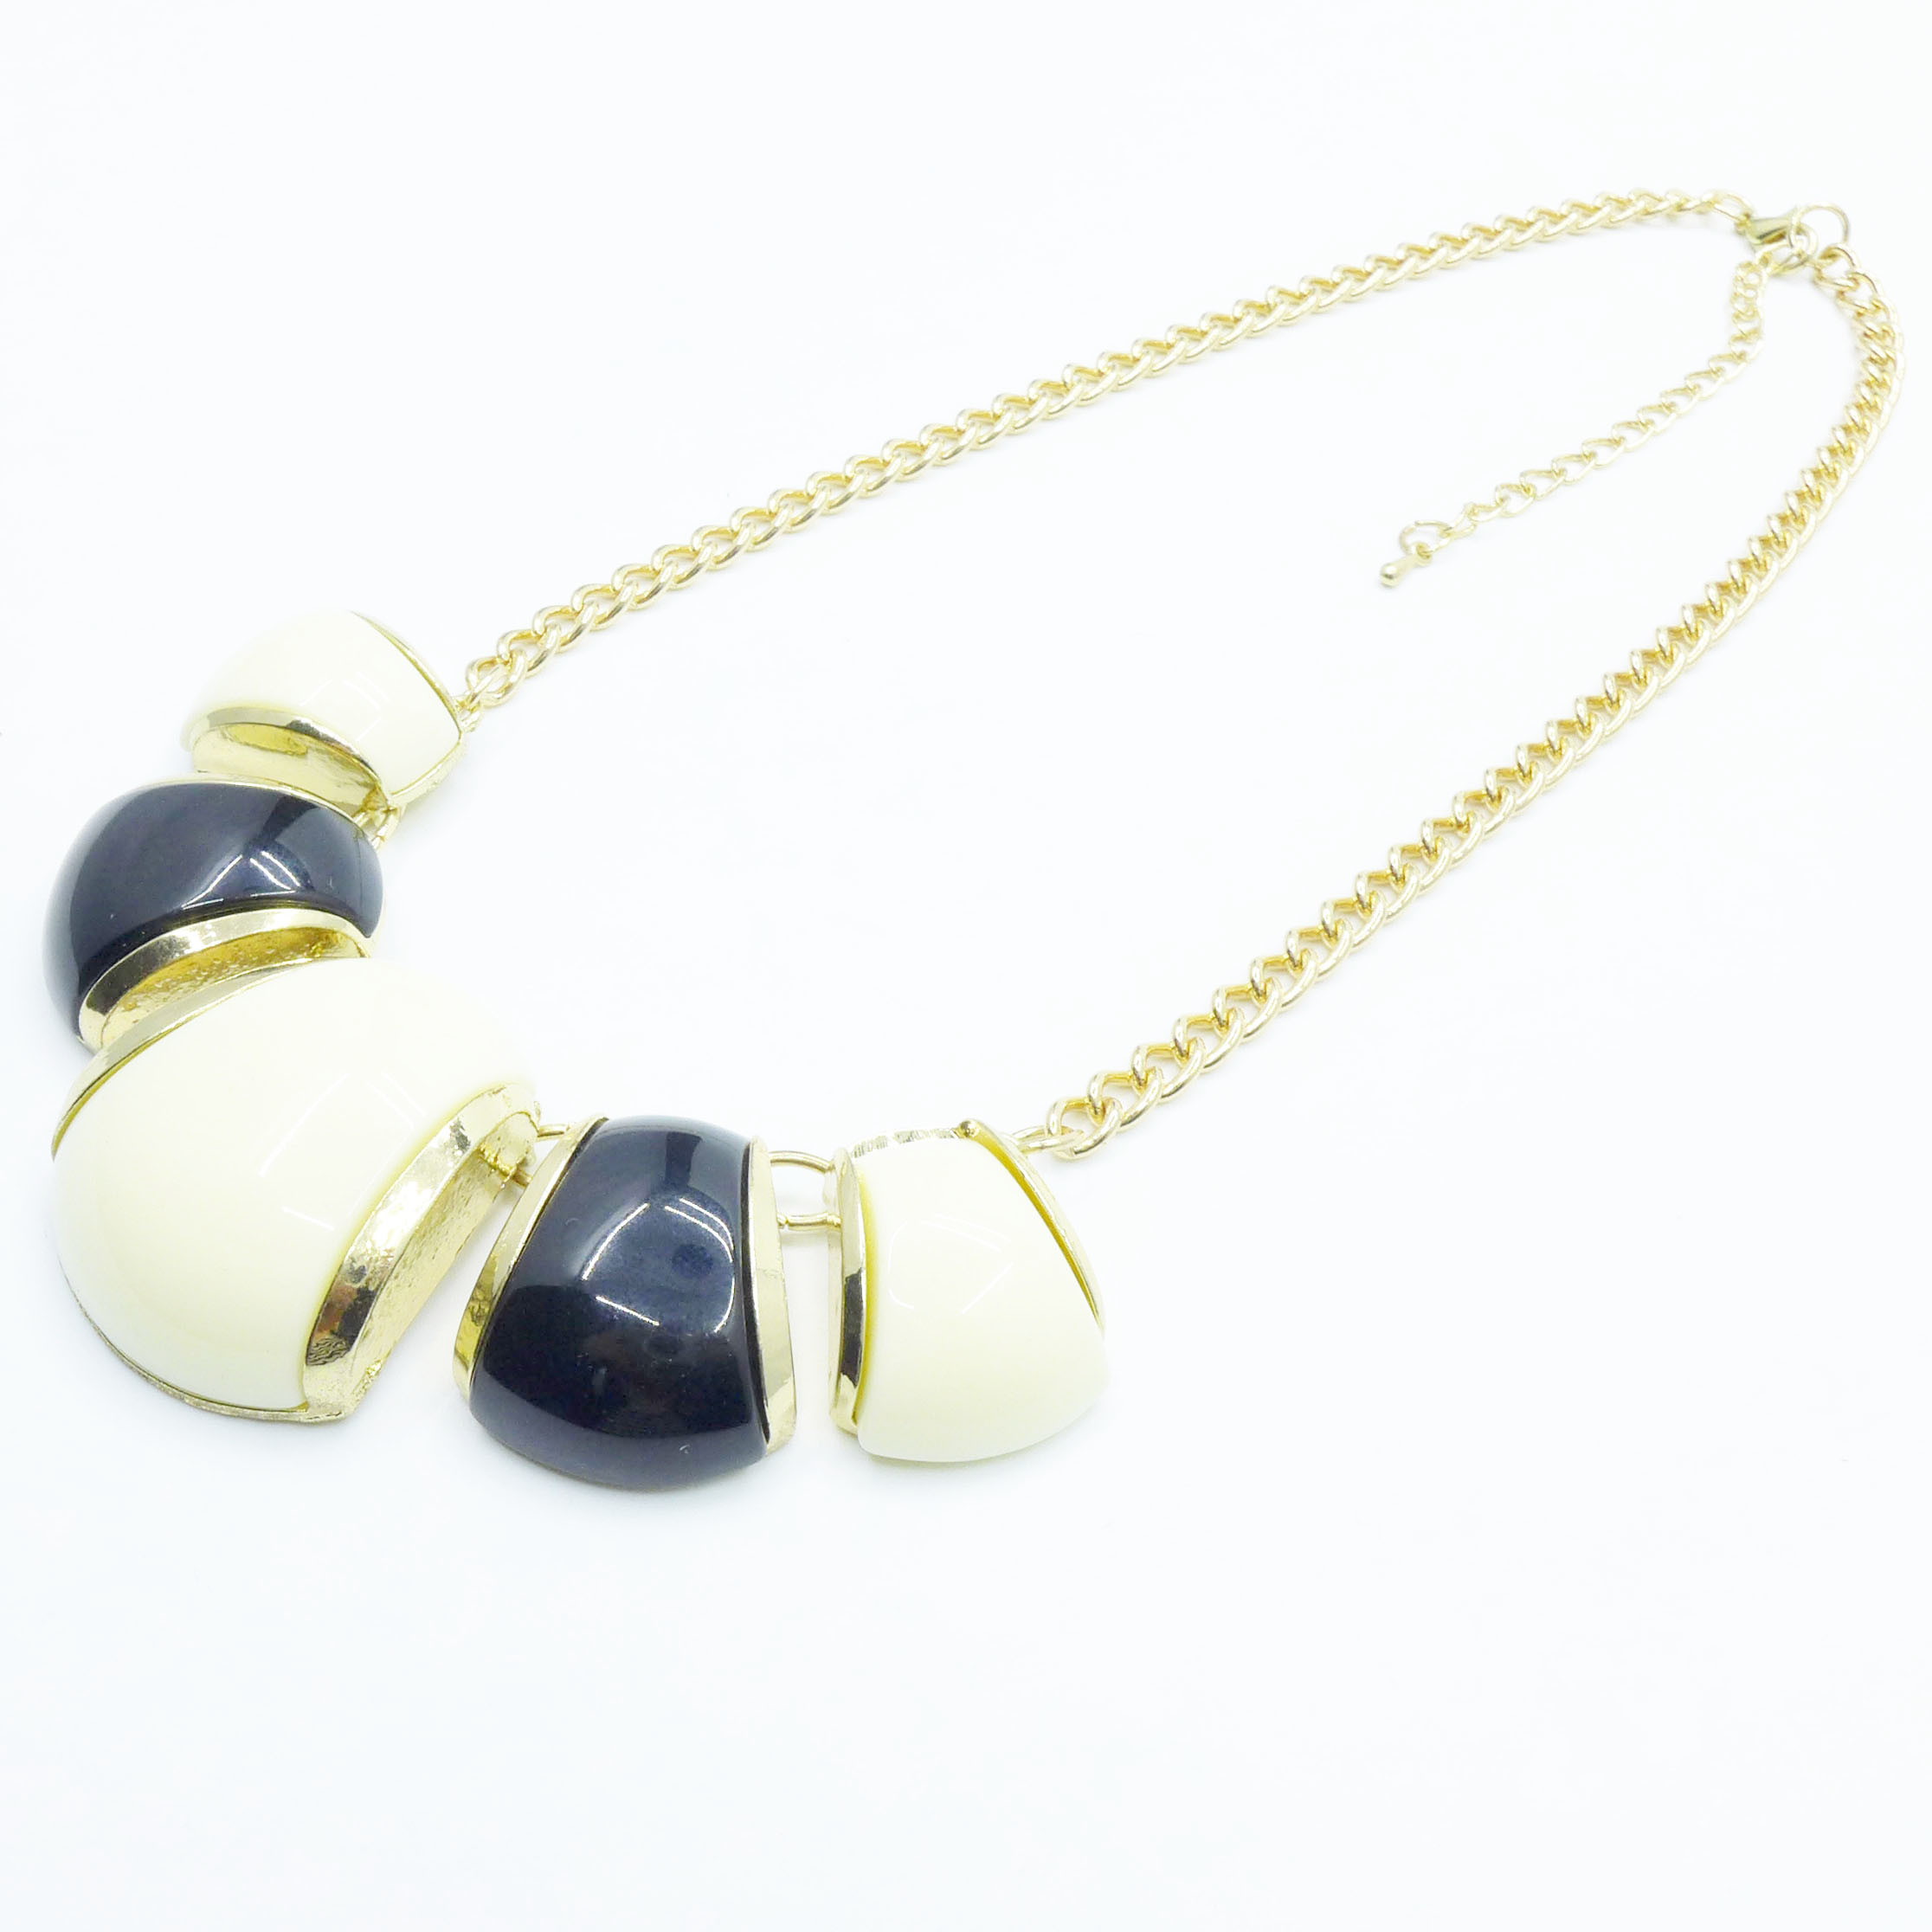 Alloy Jewelry Fashion Accessories Resin Necklace